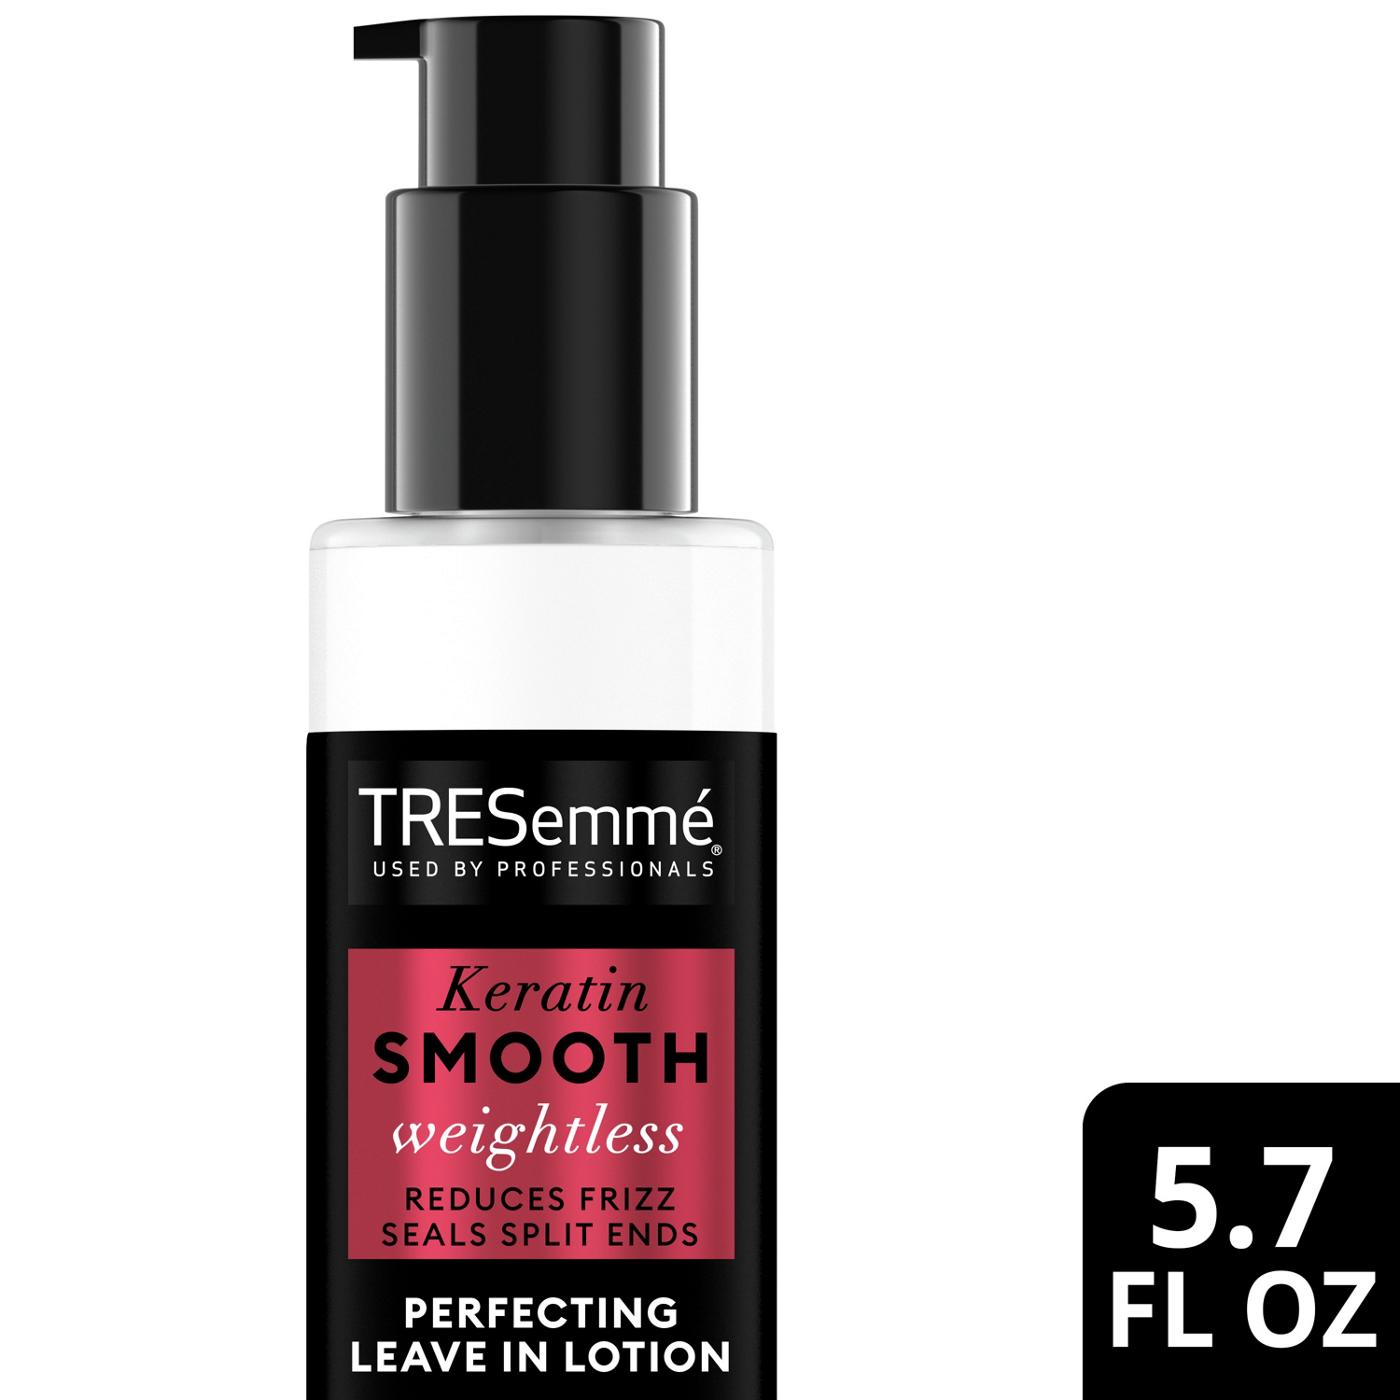 TRESemmé Our line of Keratin Smooth Weightless products is specially designed to fight frizz, boost smoothness and shine, and add silky softness. Our Perfecting Leave-In Lotion’s nourishing formula allows you to style and visibly repair your hair by sealing up to 88% of split ends with no weighdown. Nourish your strands, tame those pesky flyaways, and protect against breakage with this conditioning formula. This leave-in lotion has a lightweight formula, so your hair won't feel greasy or oily. Perfect your Sleek & Straight look in 3 easy steps. Prep strands with Keratin Smooth Shampoo and Conditioner, then style with Keratin Smooth Leave-In Lotion to nourish & seal split ends. Start by working the lotion into damp hair, avoiding your roots. Blow dry and style your hair, then finish with our Keratin Smooth Anti-Frizz Finishing Spray. Pro tip: For an even sleeker, smooth style, use a flat iron to activate the thermal technology inside this leave-in lotion. Since 1948, TRESemmé has been dedicated to providing professional-quality results to empower YOU to express your style. Our unique formulas are PETA-approved and made with carefully selected ingredients, and TRESemmé never tests on animals. We're always made with intention and inspired by the latest trends and style.; image 3 of 3